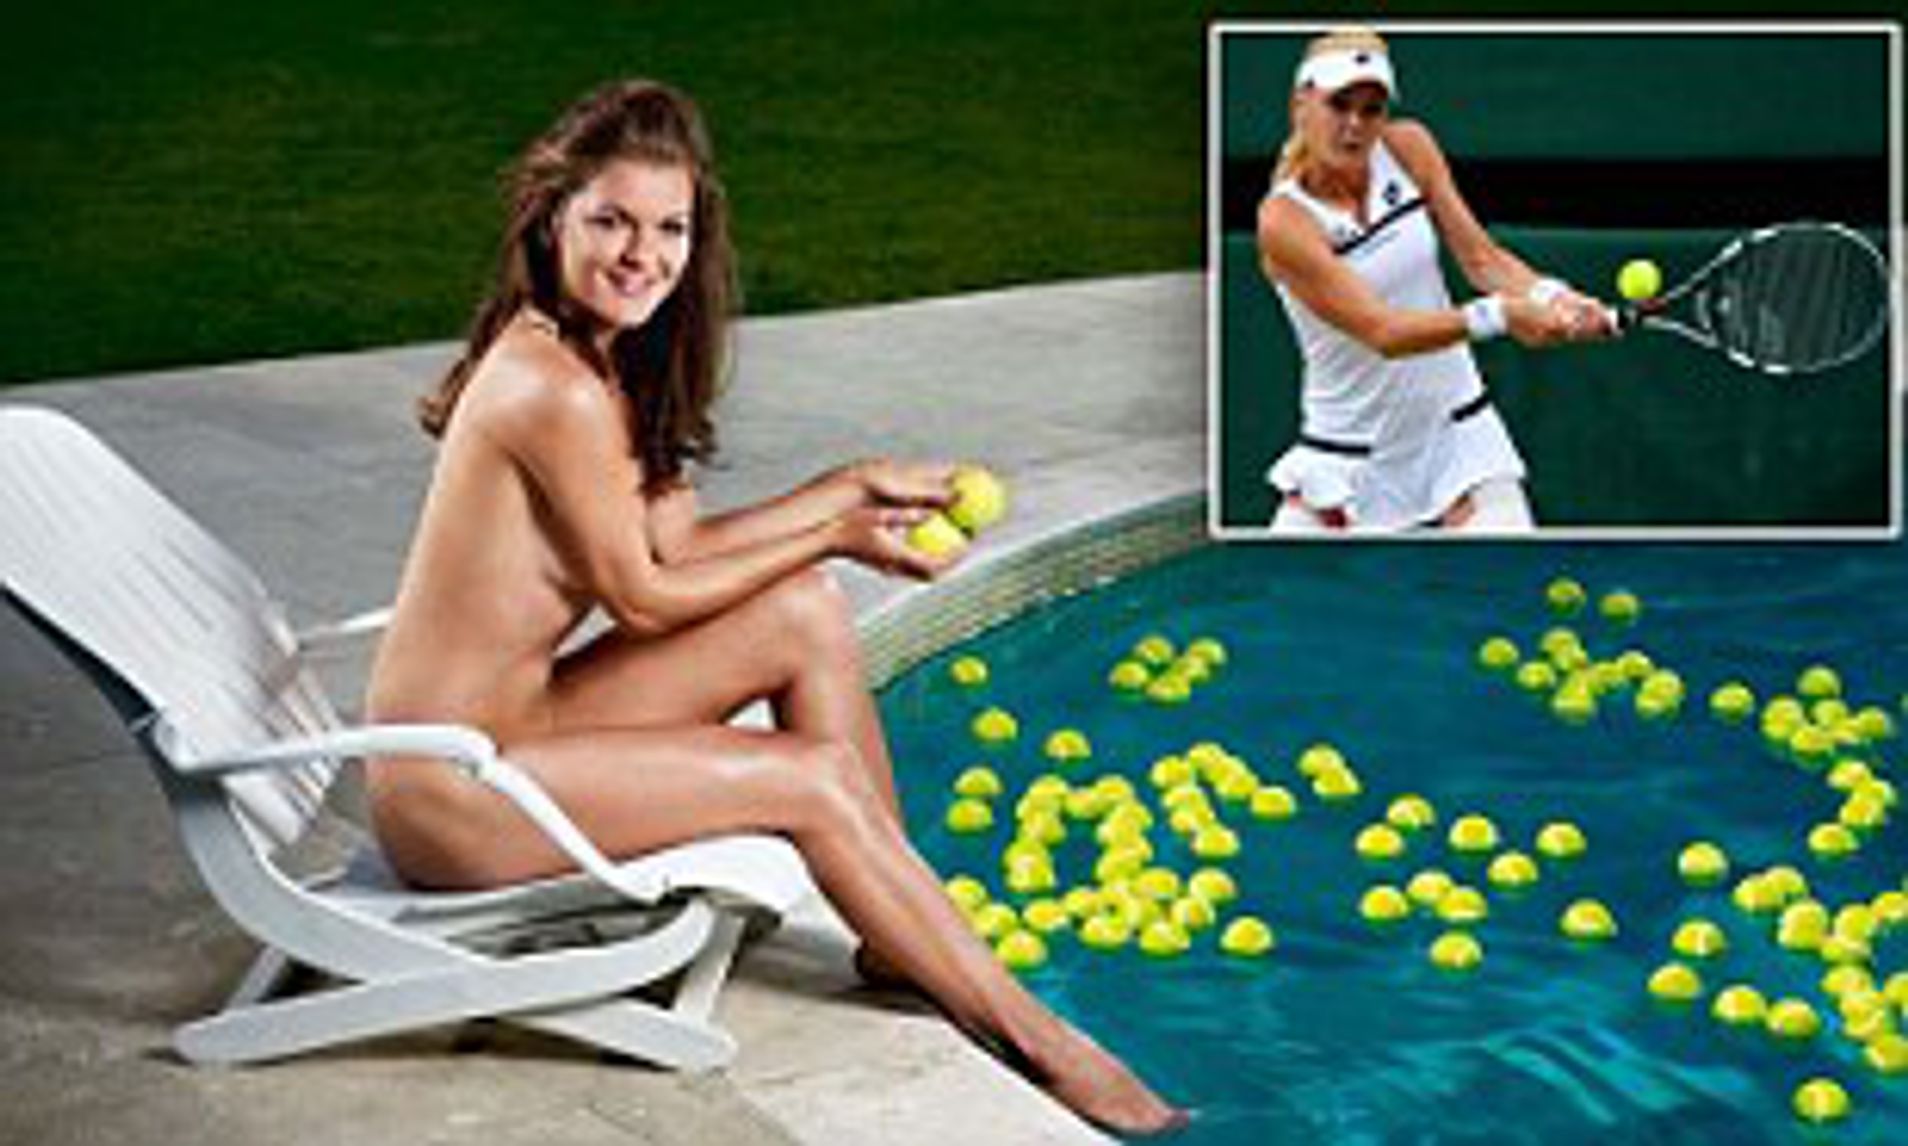 bryan kern recommends pro tennis players nude pic